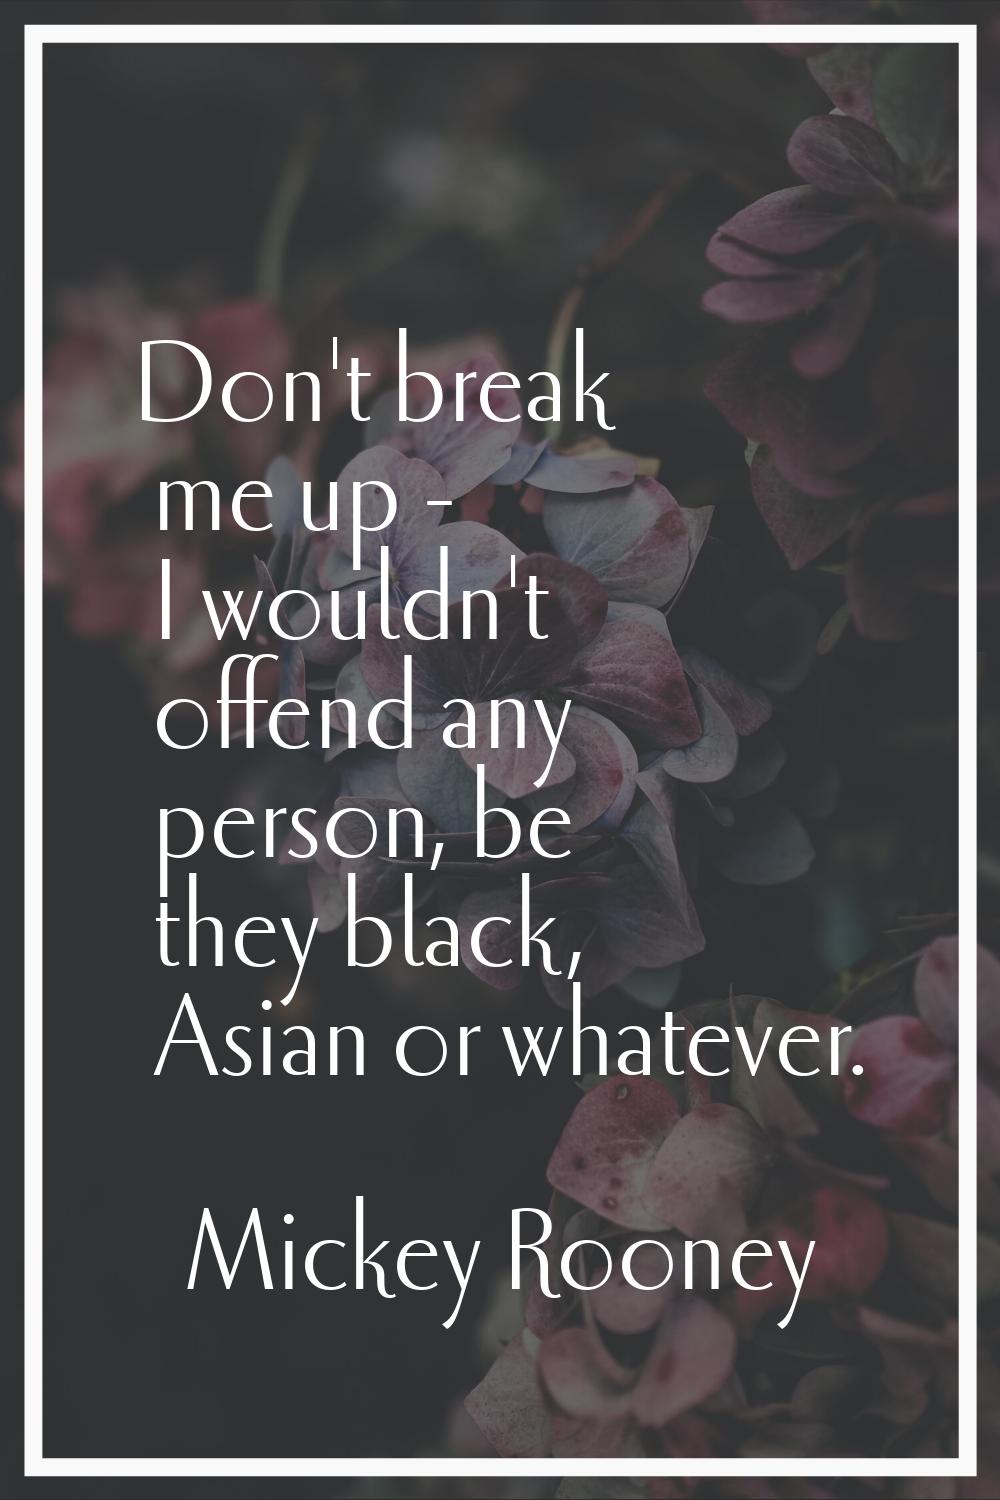 Don't break me up - I wouldn't offend any person, be they black, Asian or whatever.